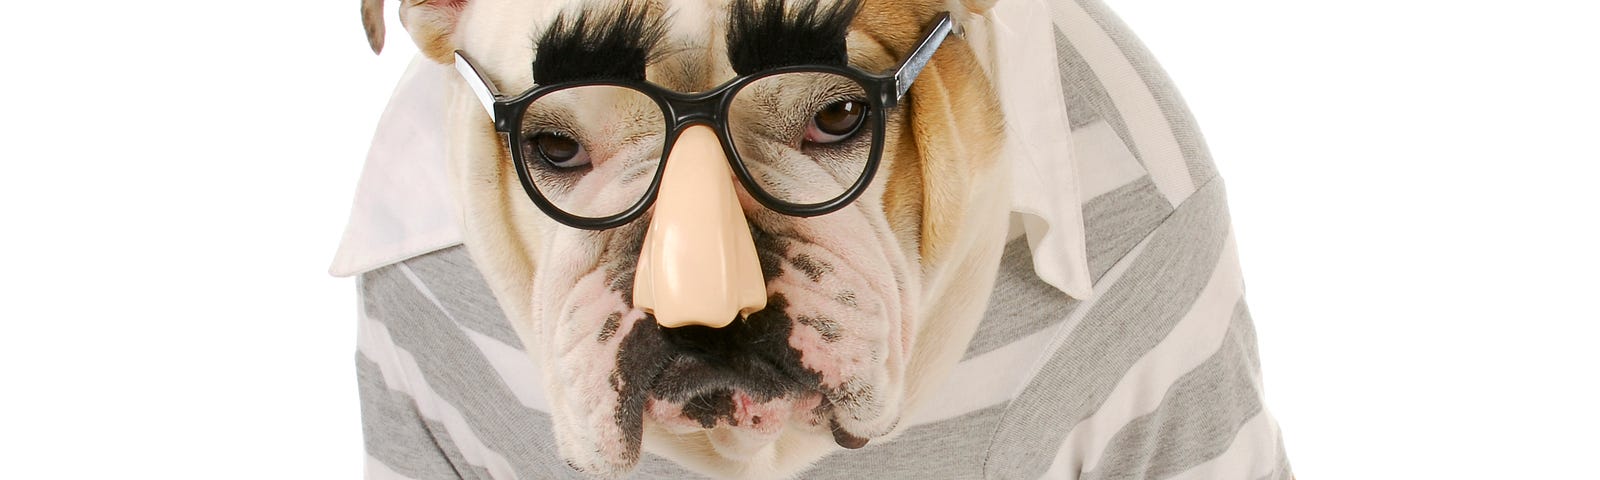 Bull dog wearing striped t-shirt and “Groucho-glasses.”